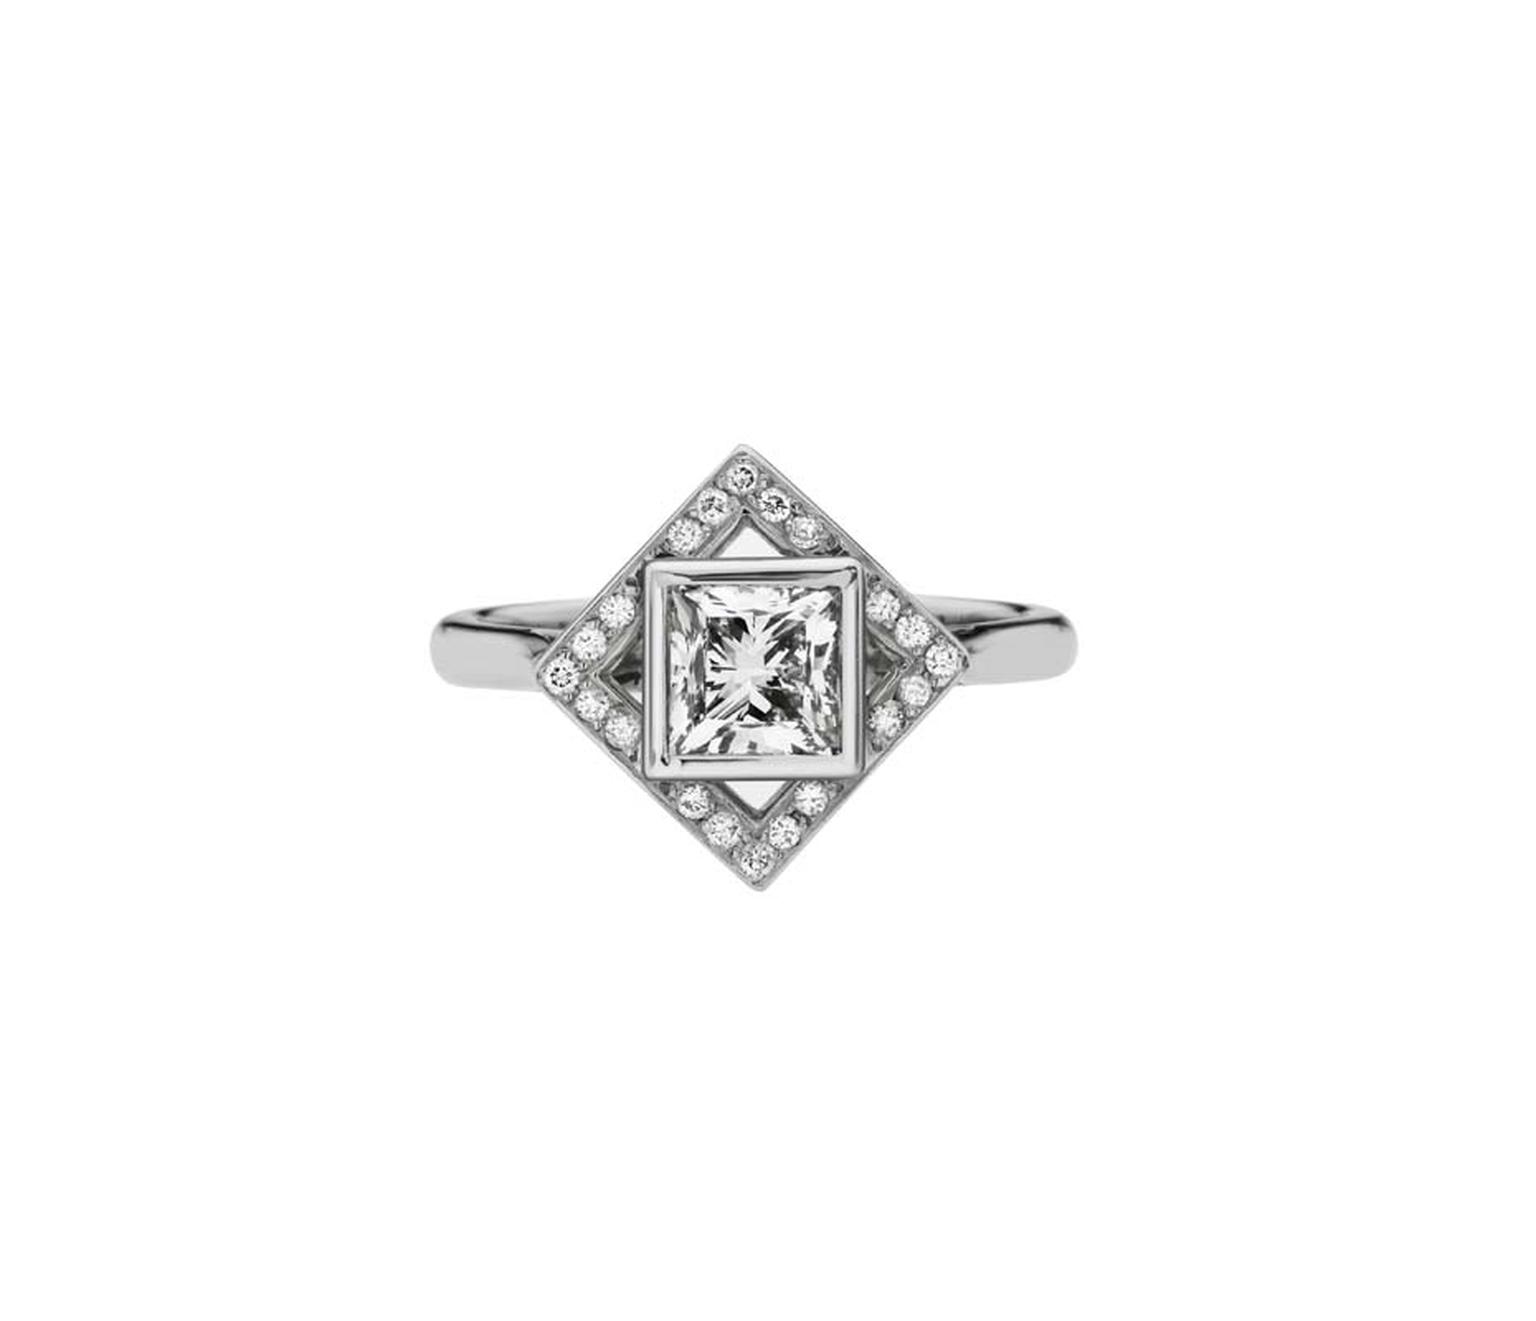 Ethan & Co princess-cut diamond ring (from £6,500).